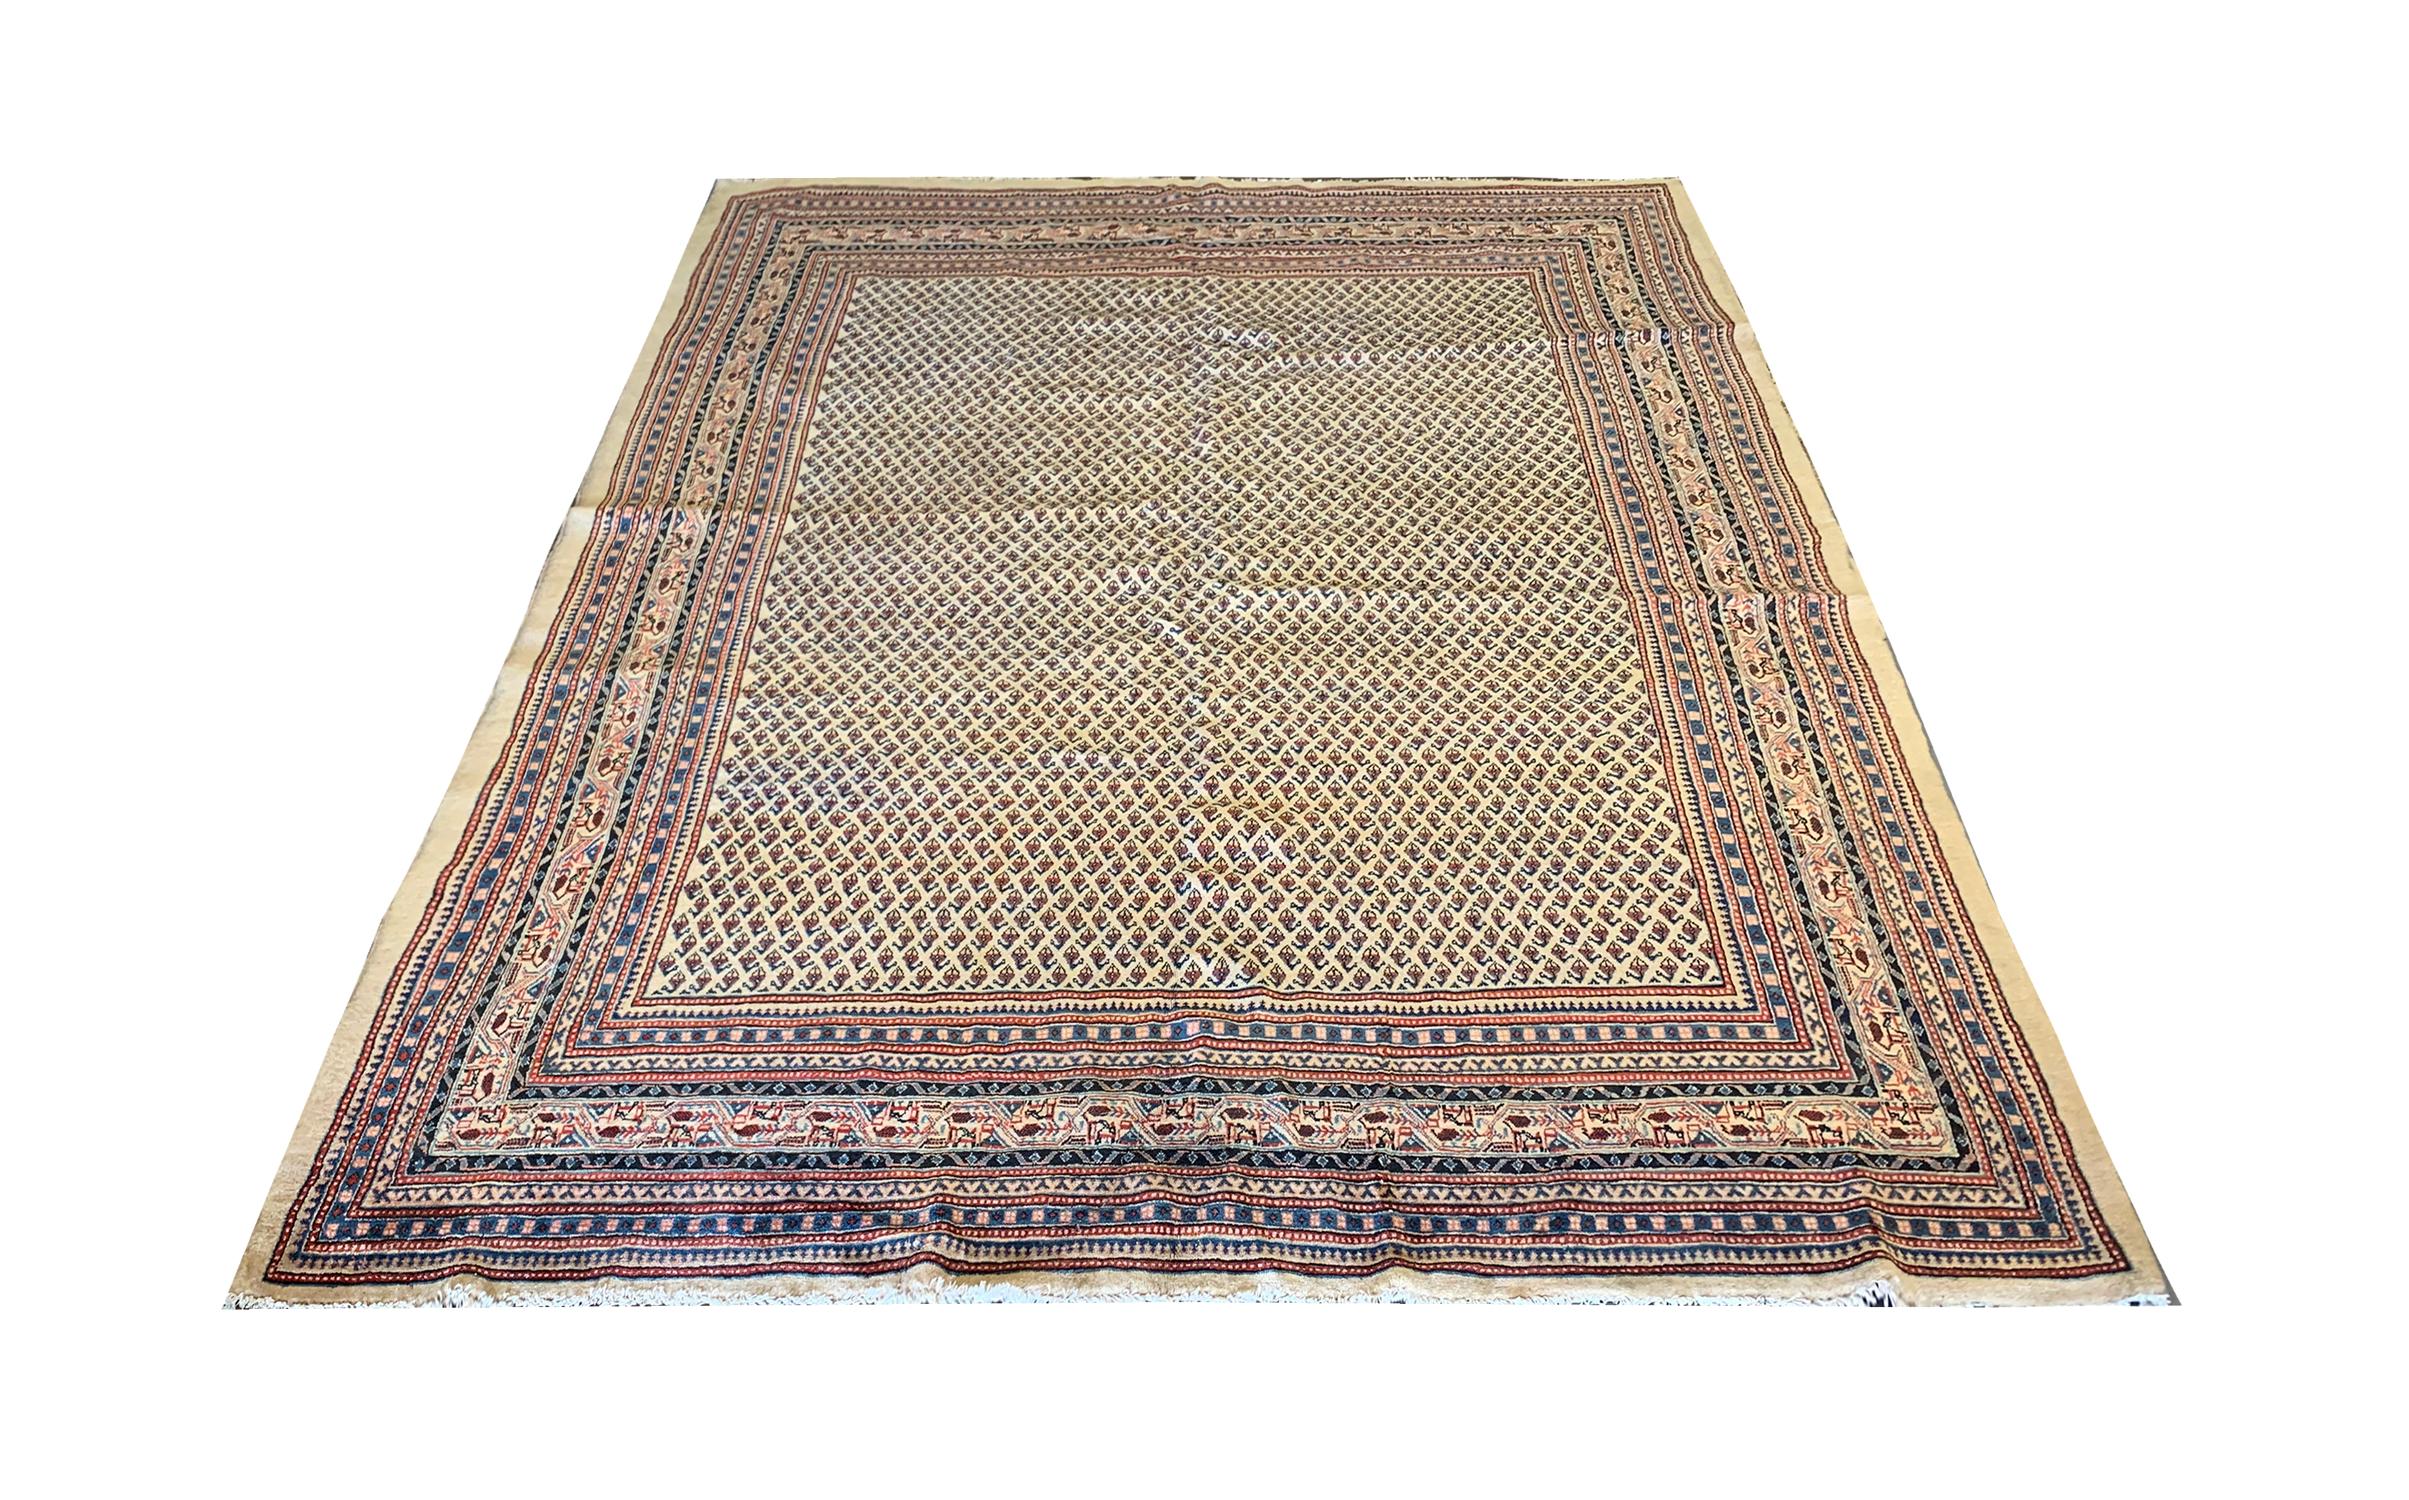 Delicately woven by hand, this traditional area rug was constructed in the 1900s. Featuring a repeating pattern central design and decorative layered border. Woven with a sleek colour palette with a cream background and blue, black and red accents